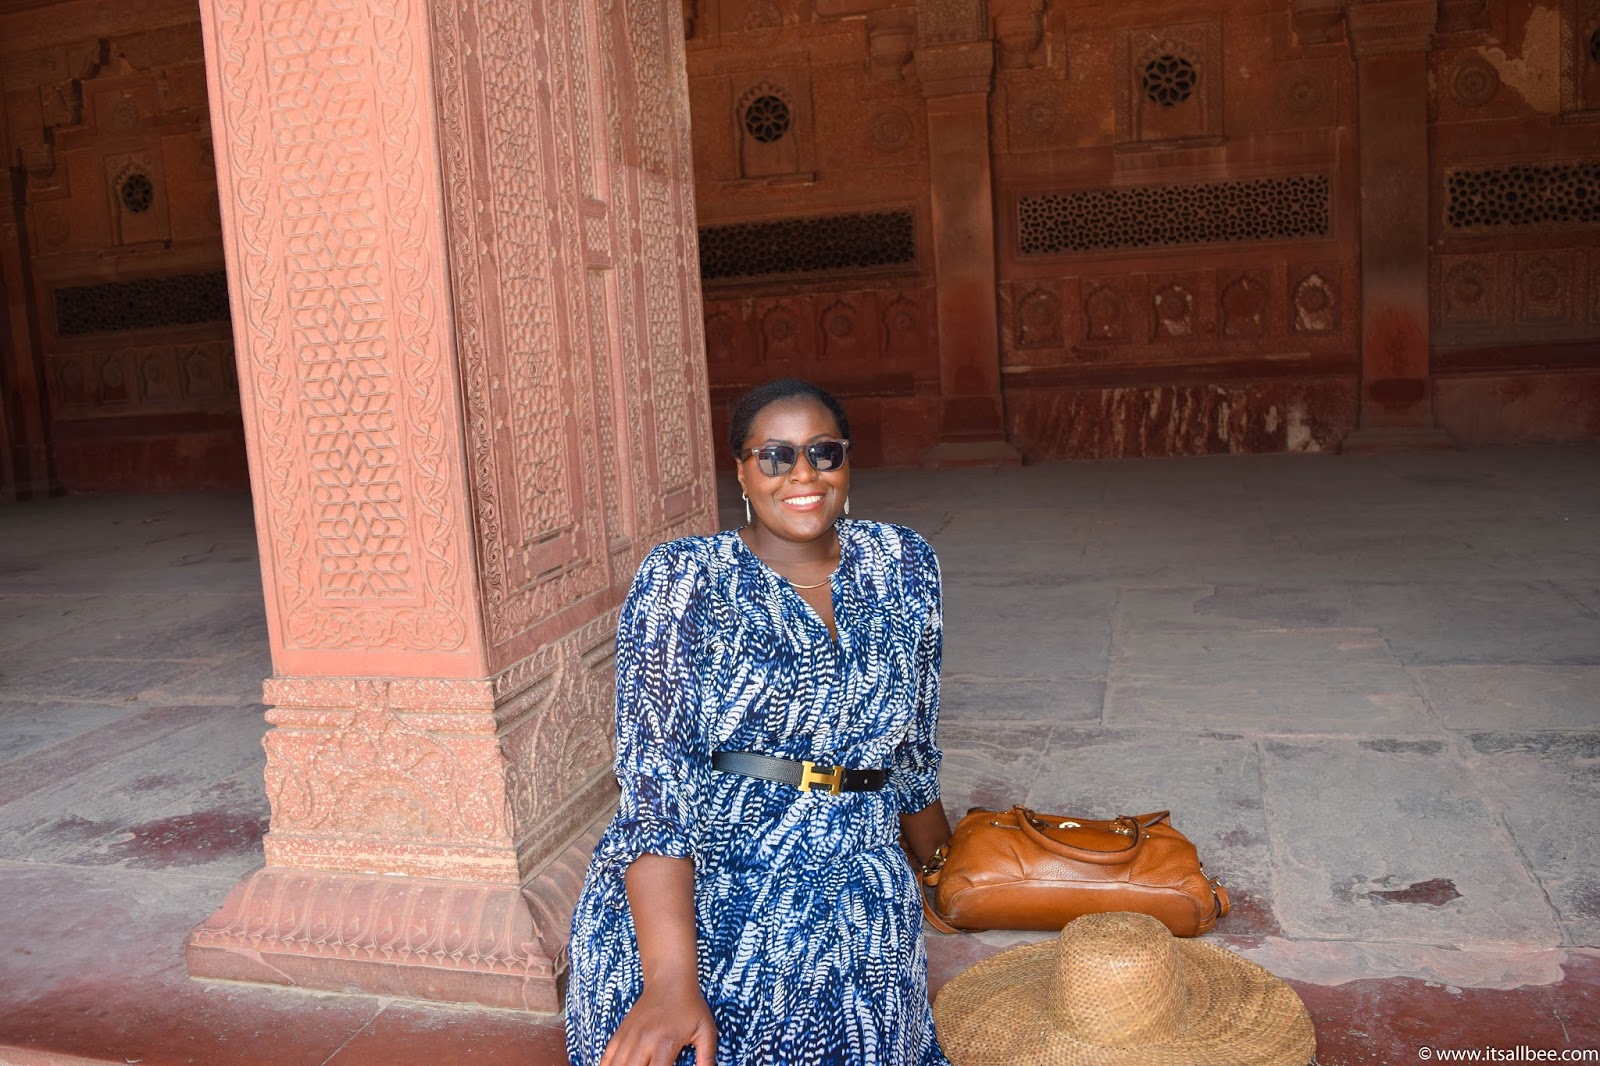 Visiting The Agra Fort - Photo by Bianca Malata - www.itsallbee.com